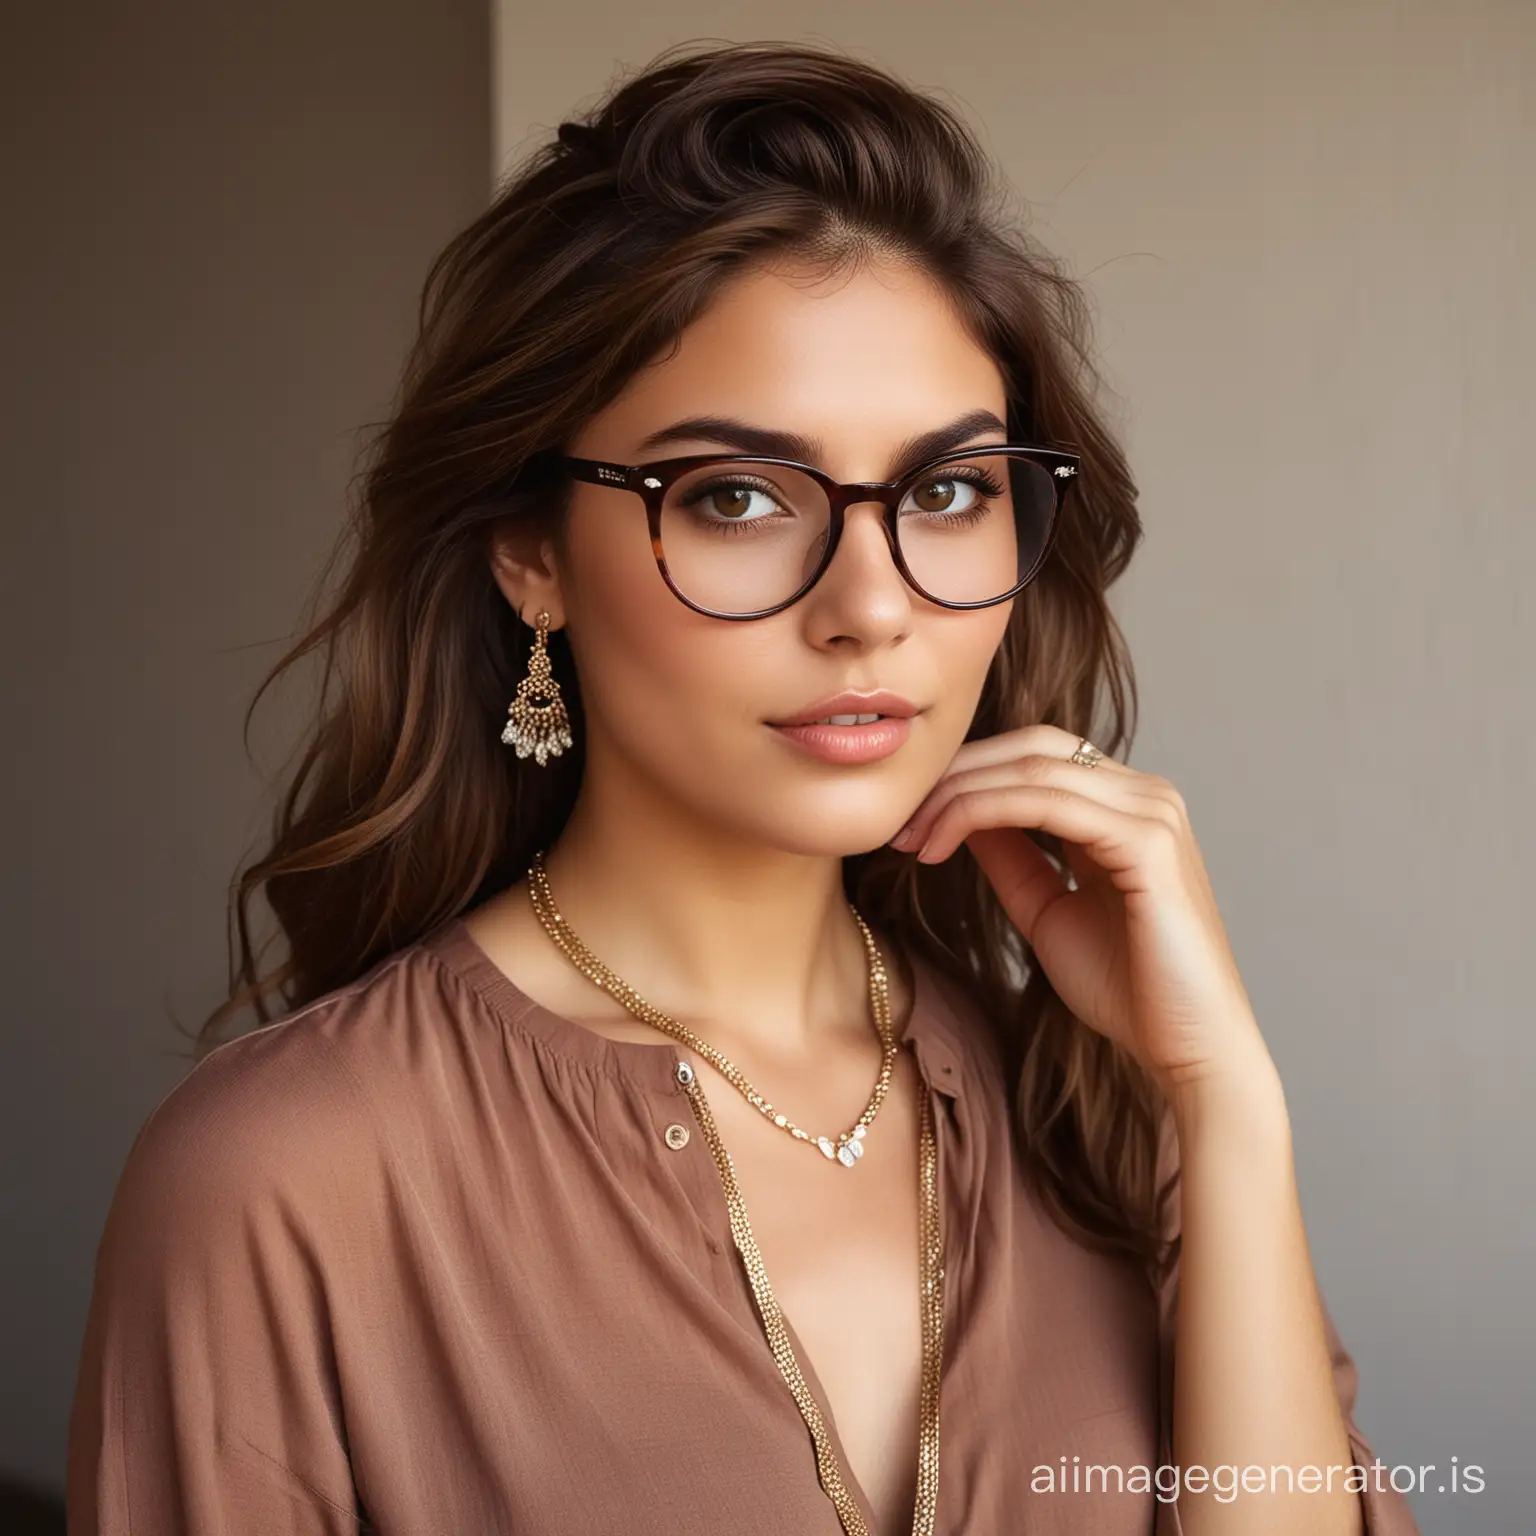 a woman in her late twenties, possesses a vibrant and confident demeanor. With dark almond-shaped eyes and luscious brown locks cascading around her shoulders, Maya exudes sophistication and creativity. She embraces chic and contemporary fashion, often accessorizing with delicate jewelry and trendy eyewear to complement her polished appearance as a junior graphic designer.